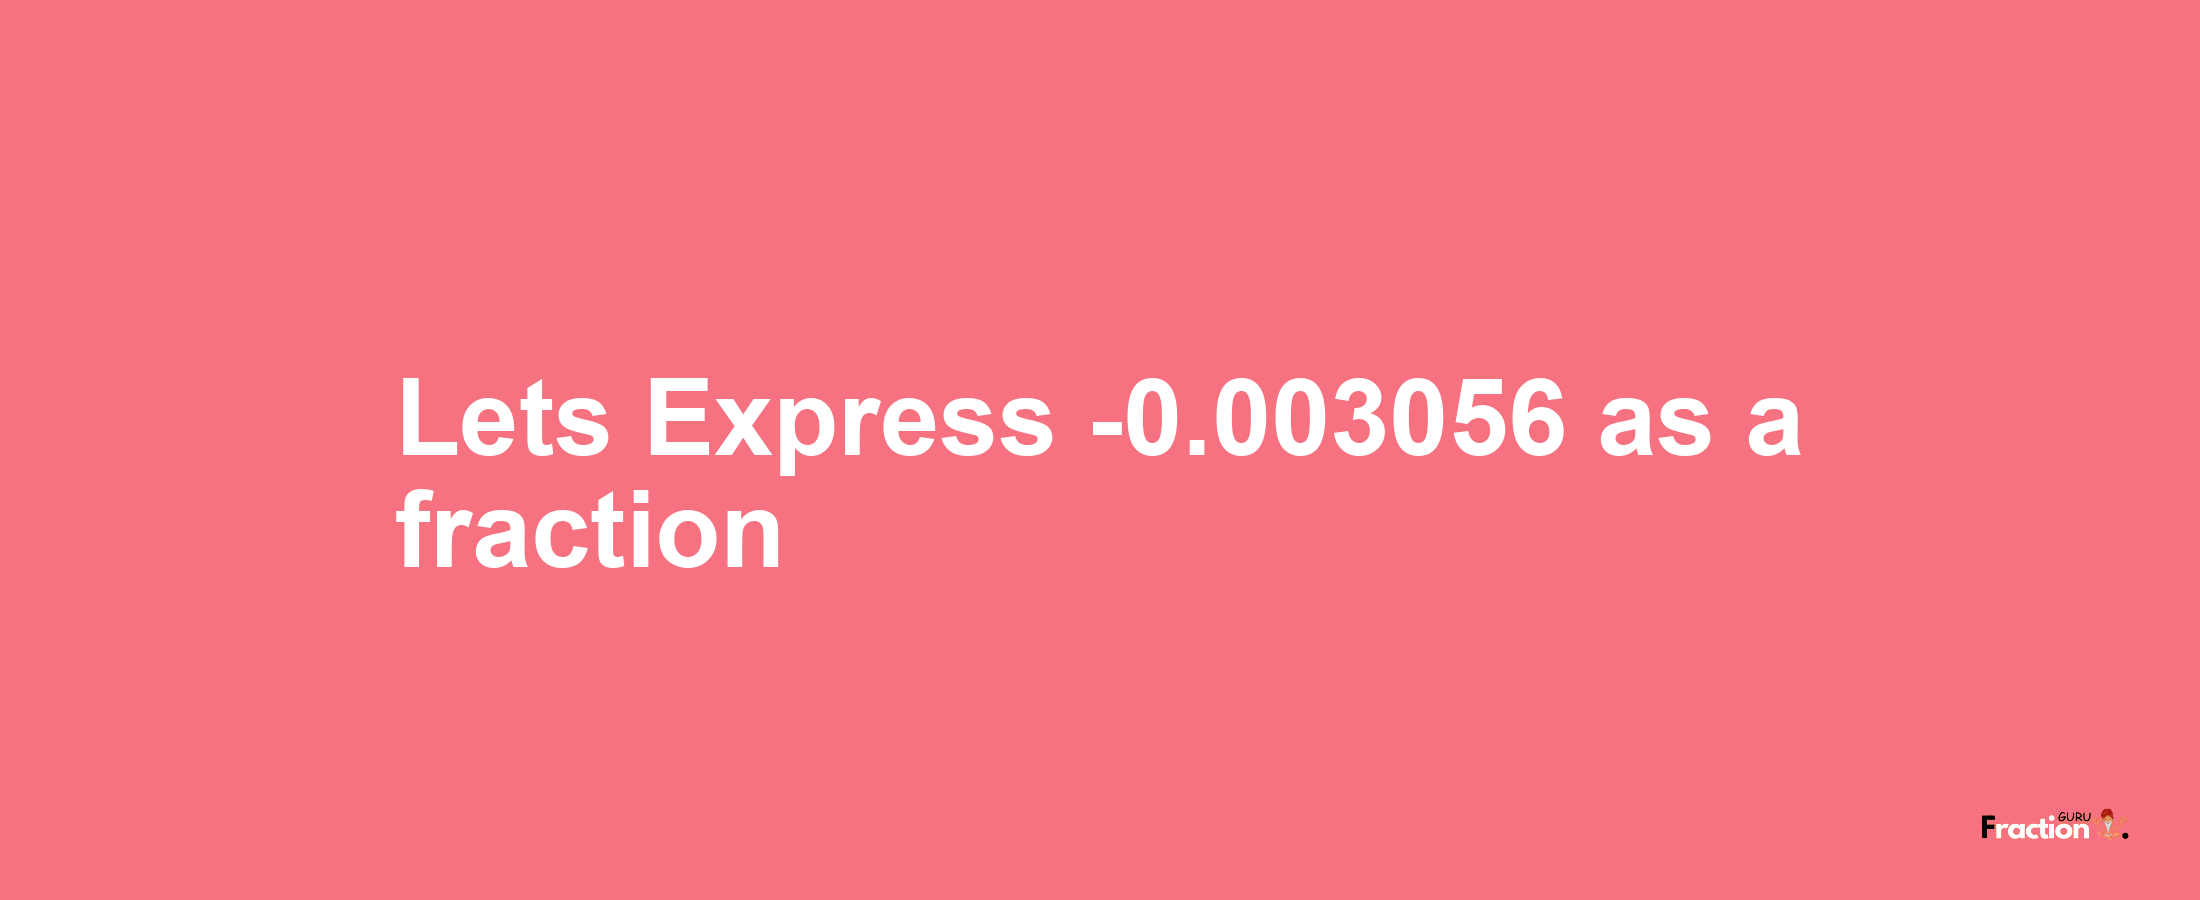 Lets Express -0.003056 as afraction